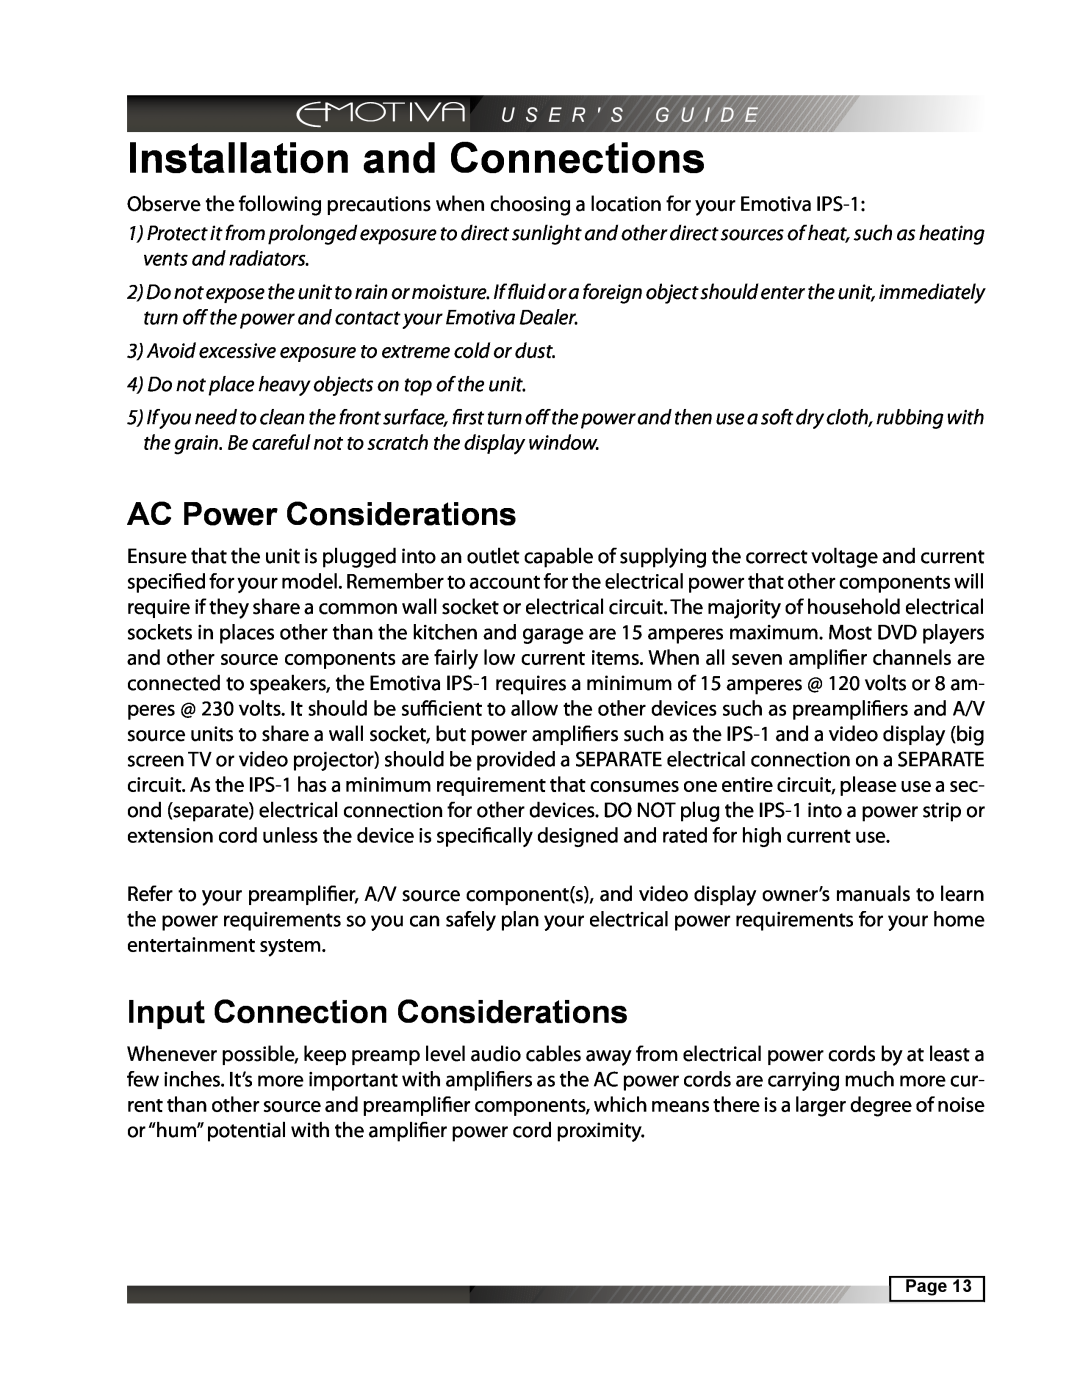 Emotiva IPS-1 manual Installation and Connections, AC Power Considerations, Input Connection Considerations 